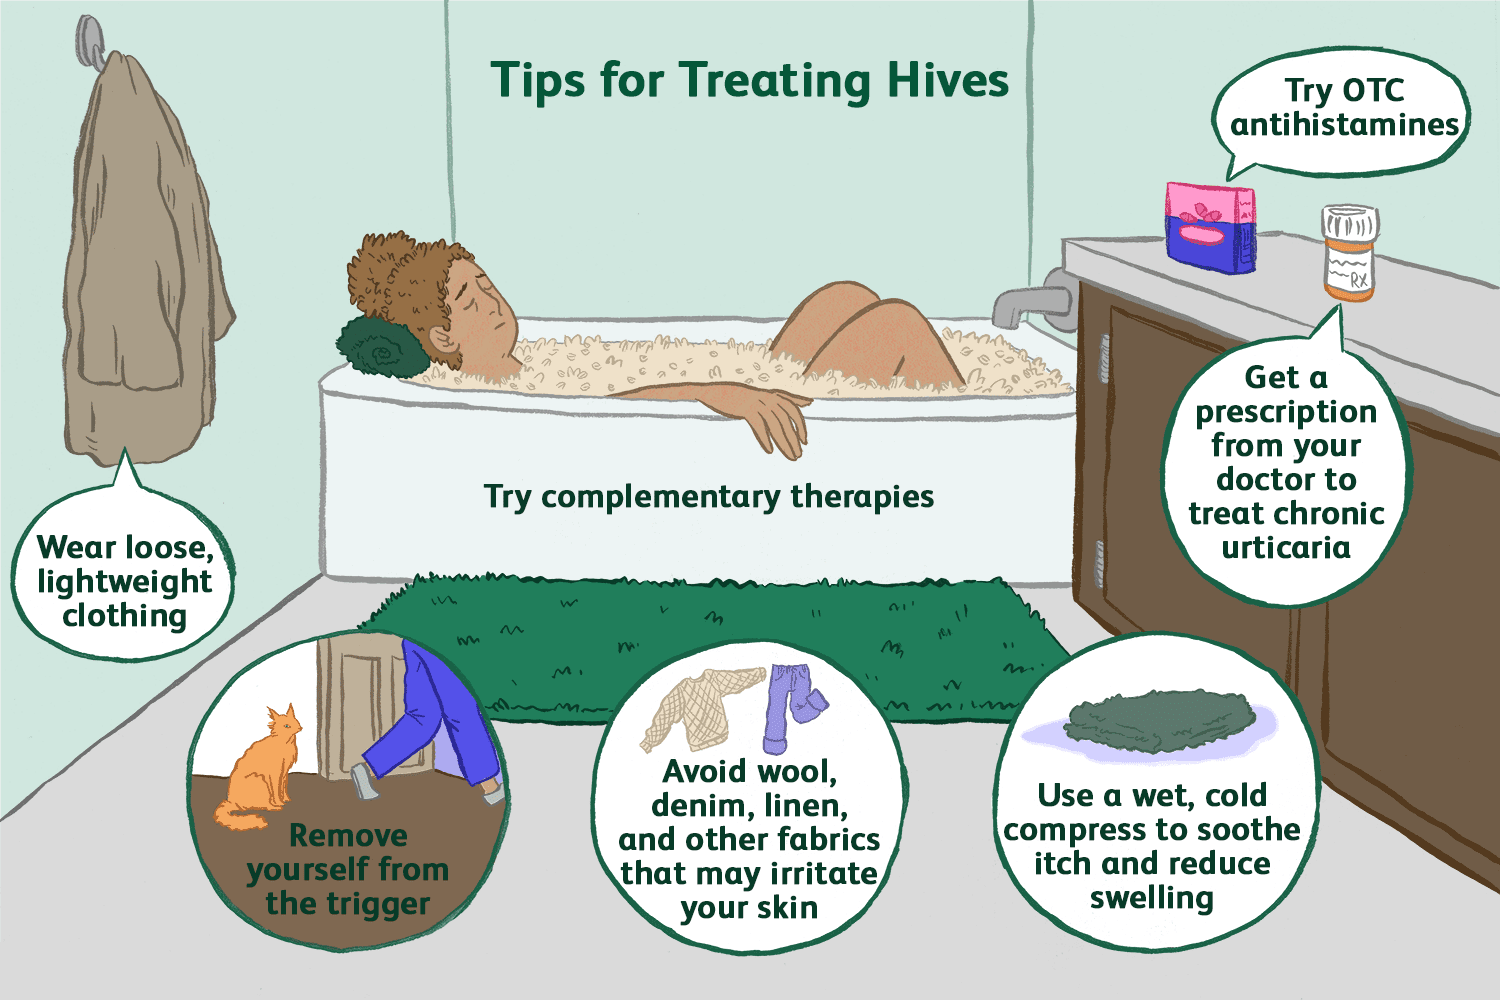 Tips for Treating Hives